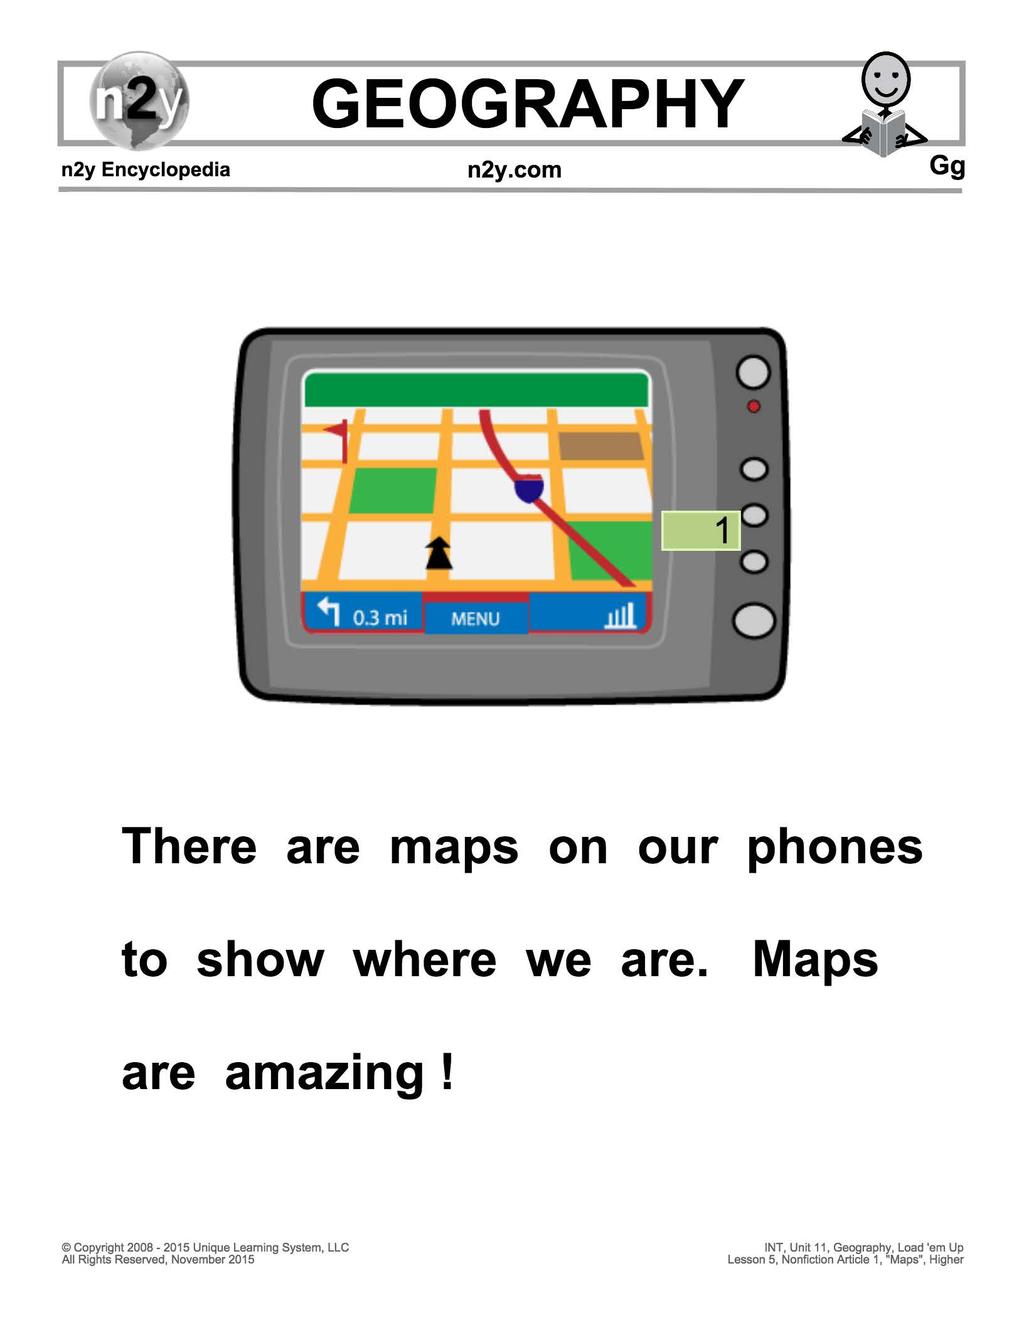 ., 0.3 mi MENU Jill There are maps on our phones to show where we are.